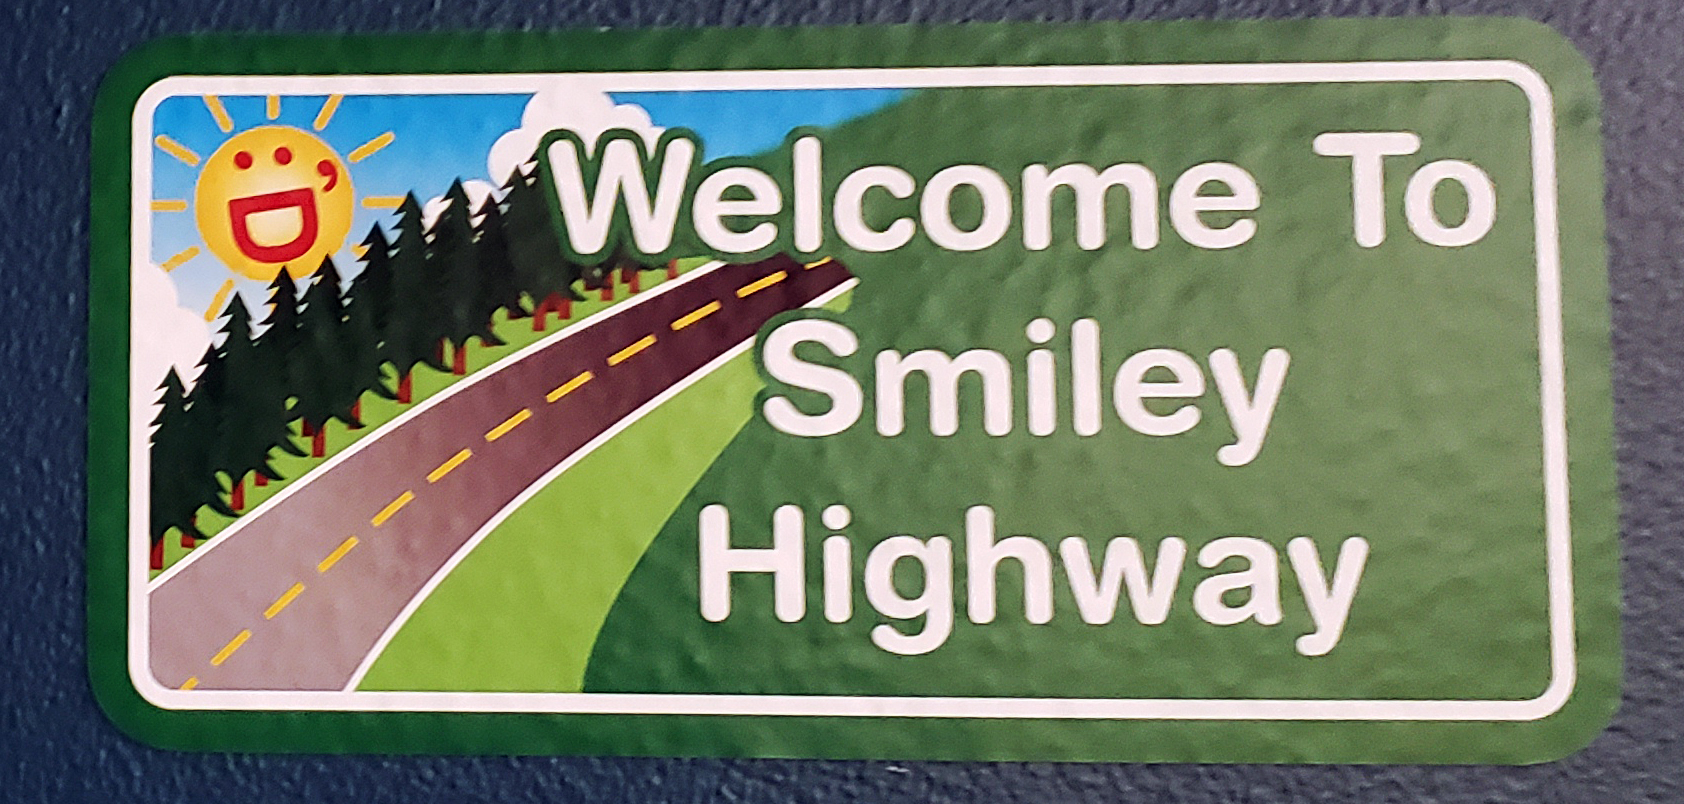 Welcome to Smiley Highway